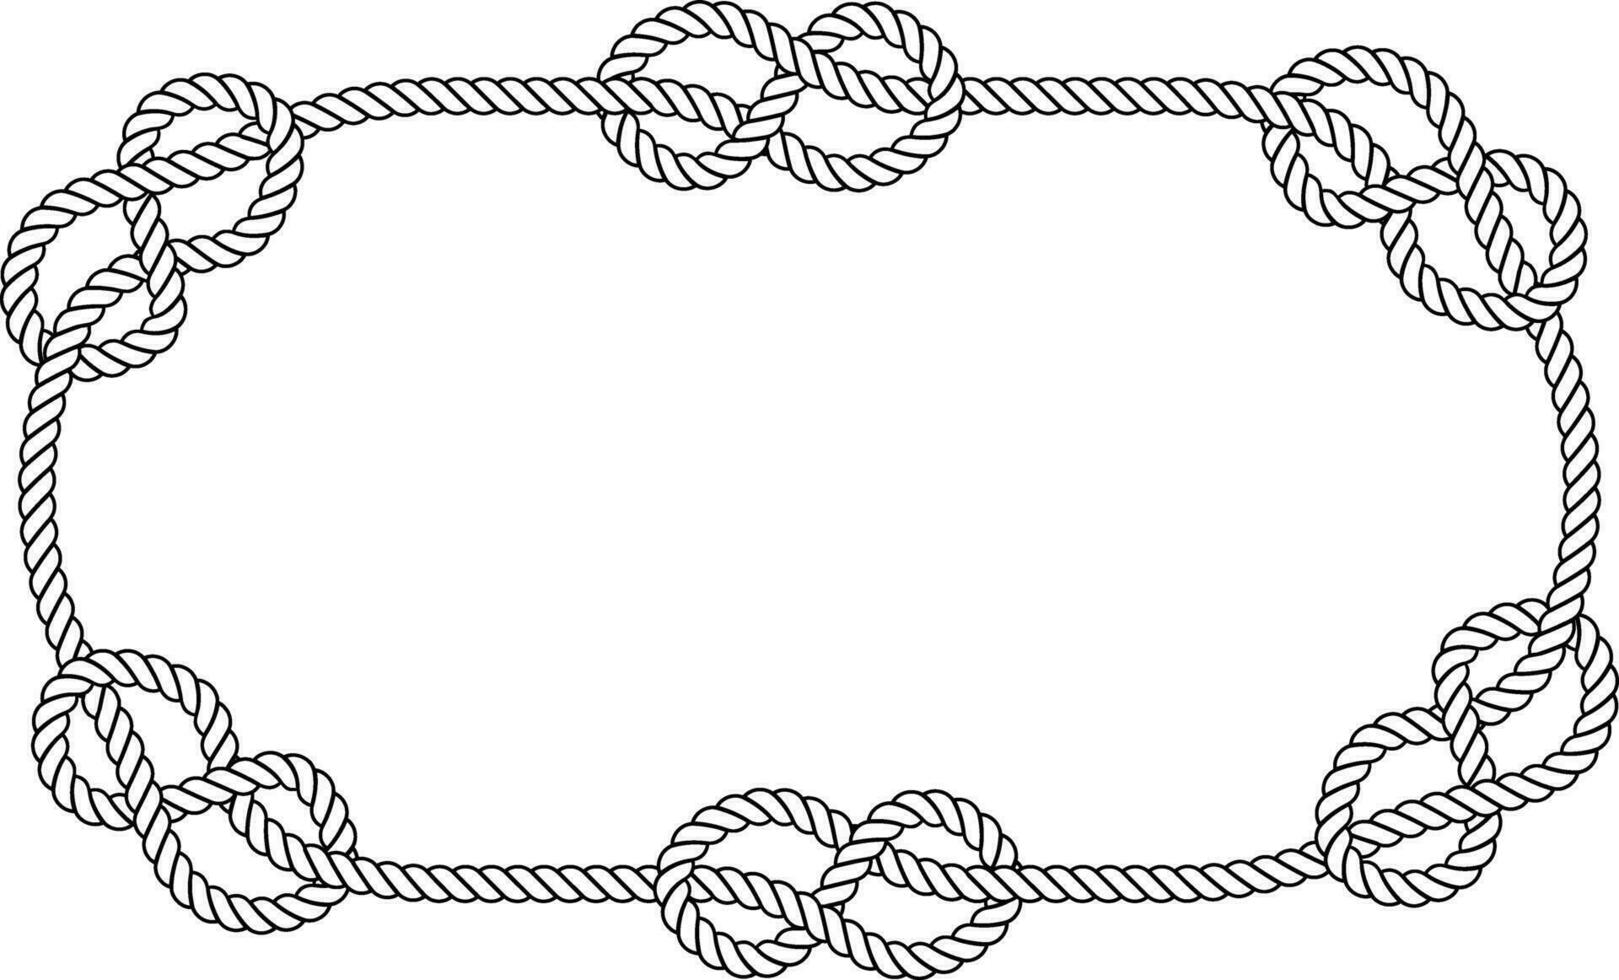 rectangular rope woven frame with copy space vector